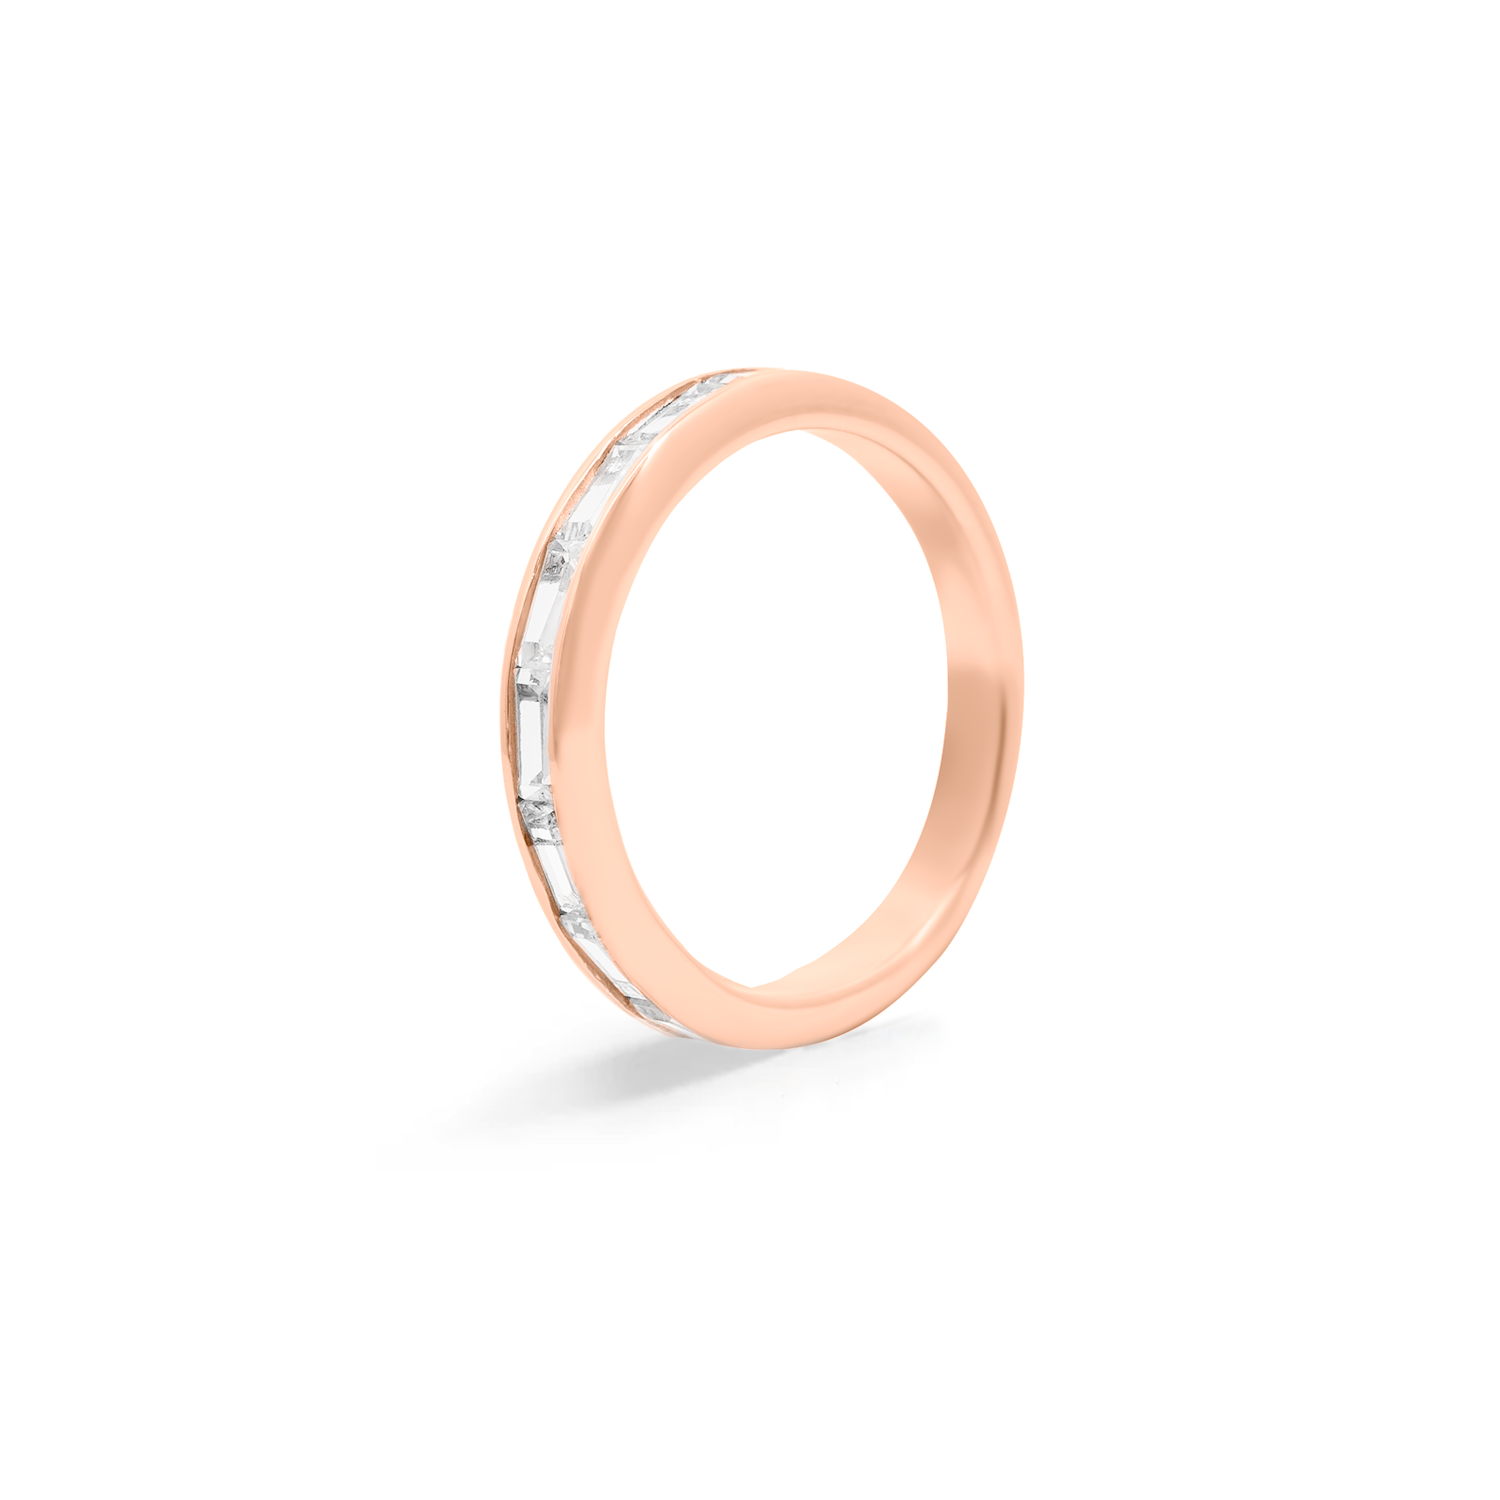 Minimalist and classic ring in rose gold with cubic zirconia